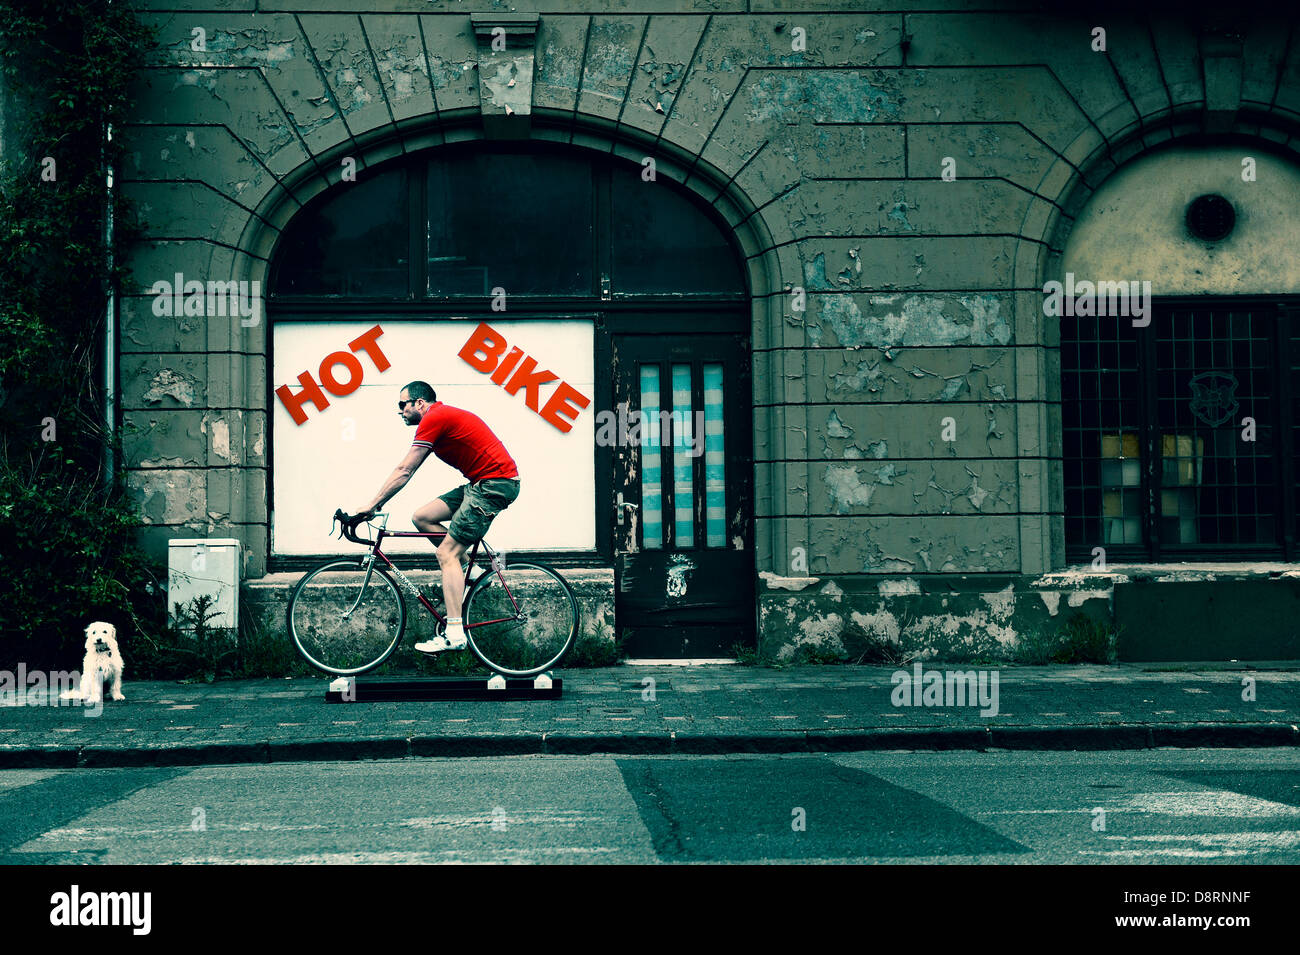 Cyclist on racing cycle training on a role in front of a rundown builing. Stock Photo